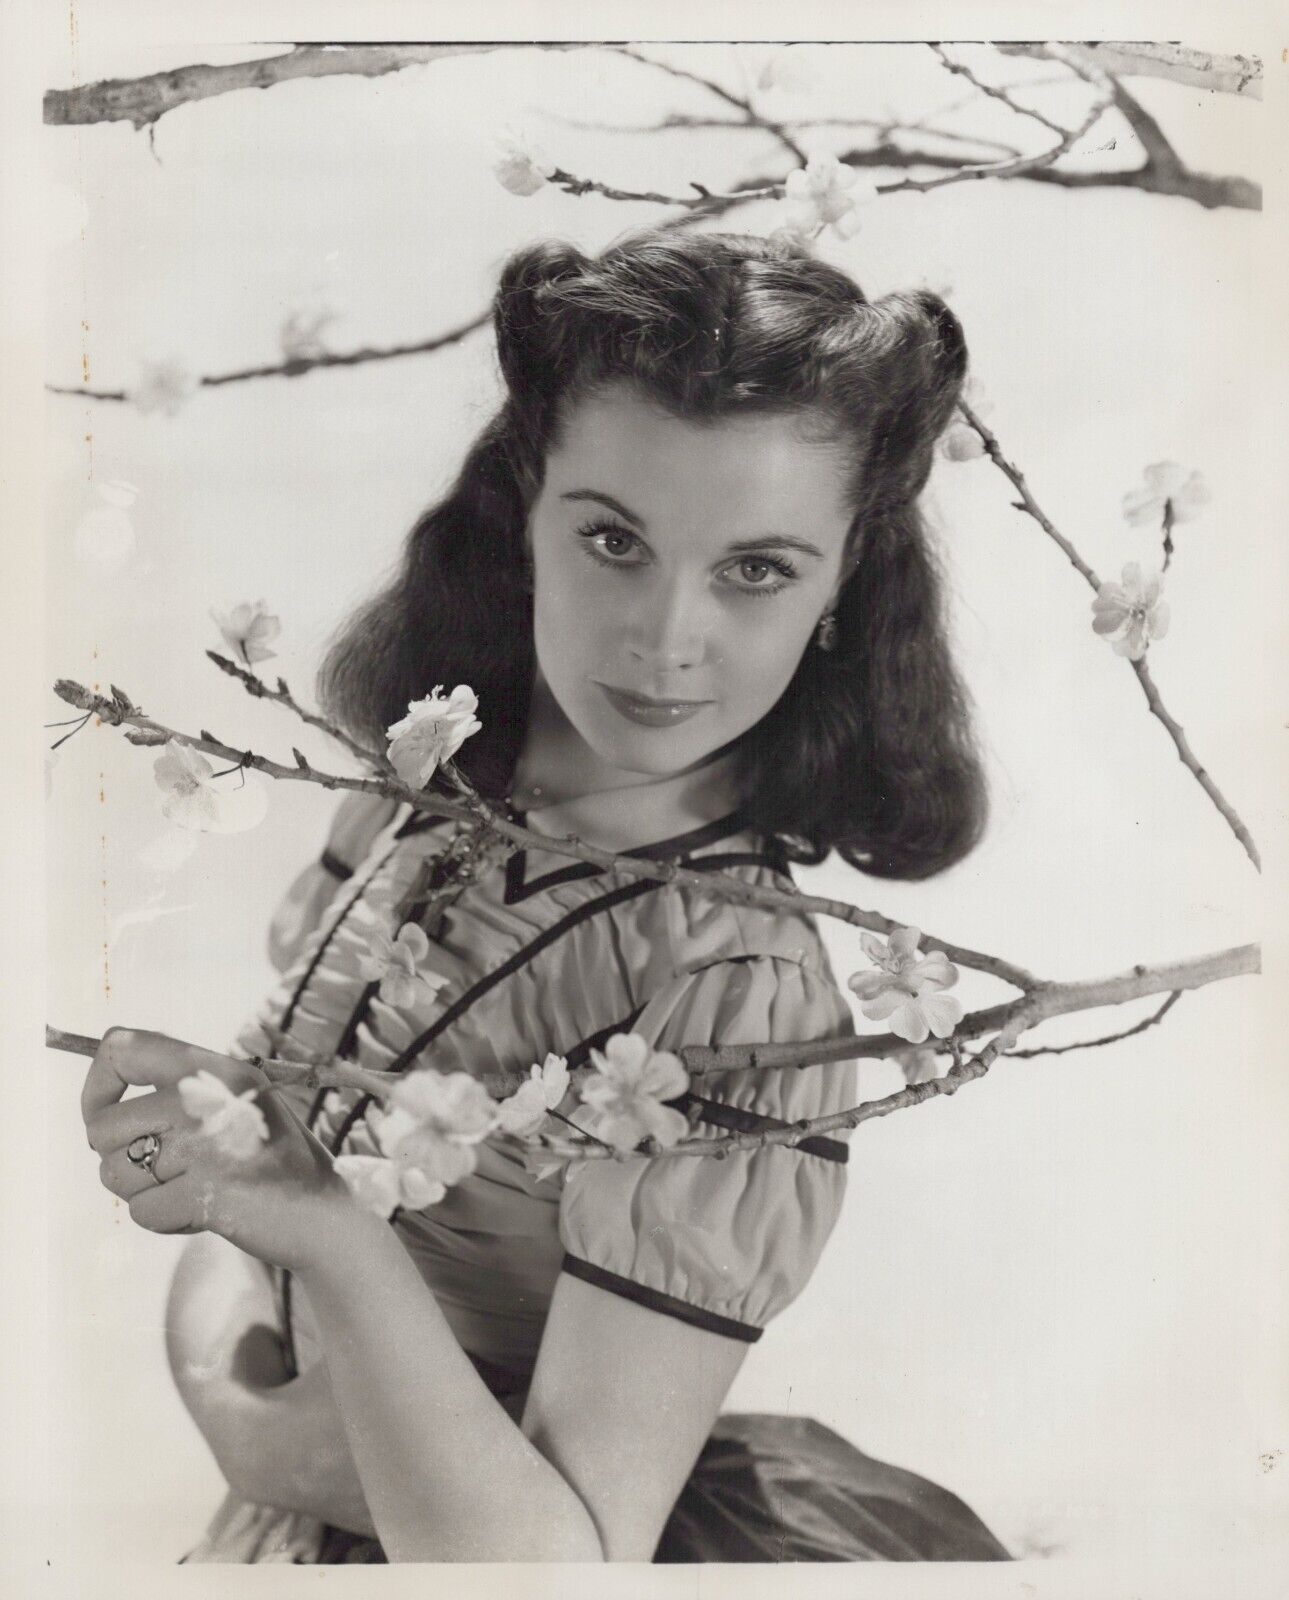 HOLLYWOOD BEAUTY VIVIEN LEIGH GONE WITH WIND STUNNING PORTRAIT 1950s Photo 536